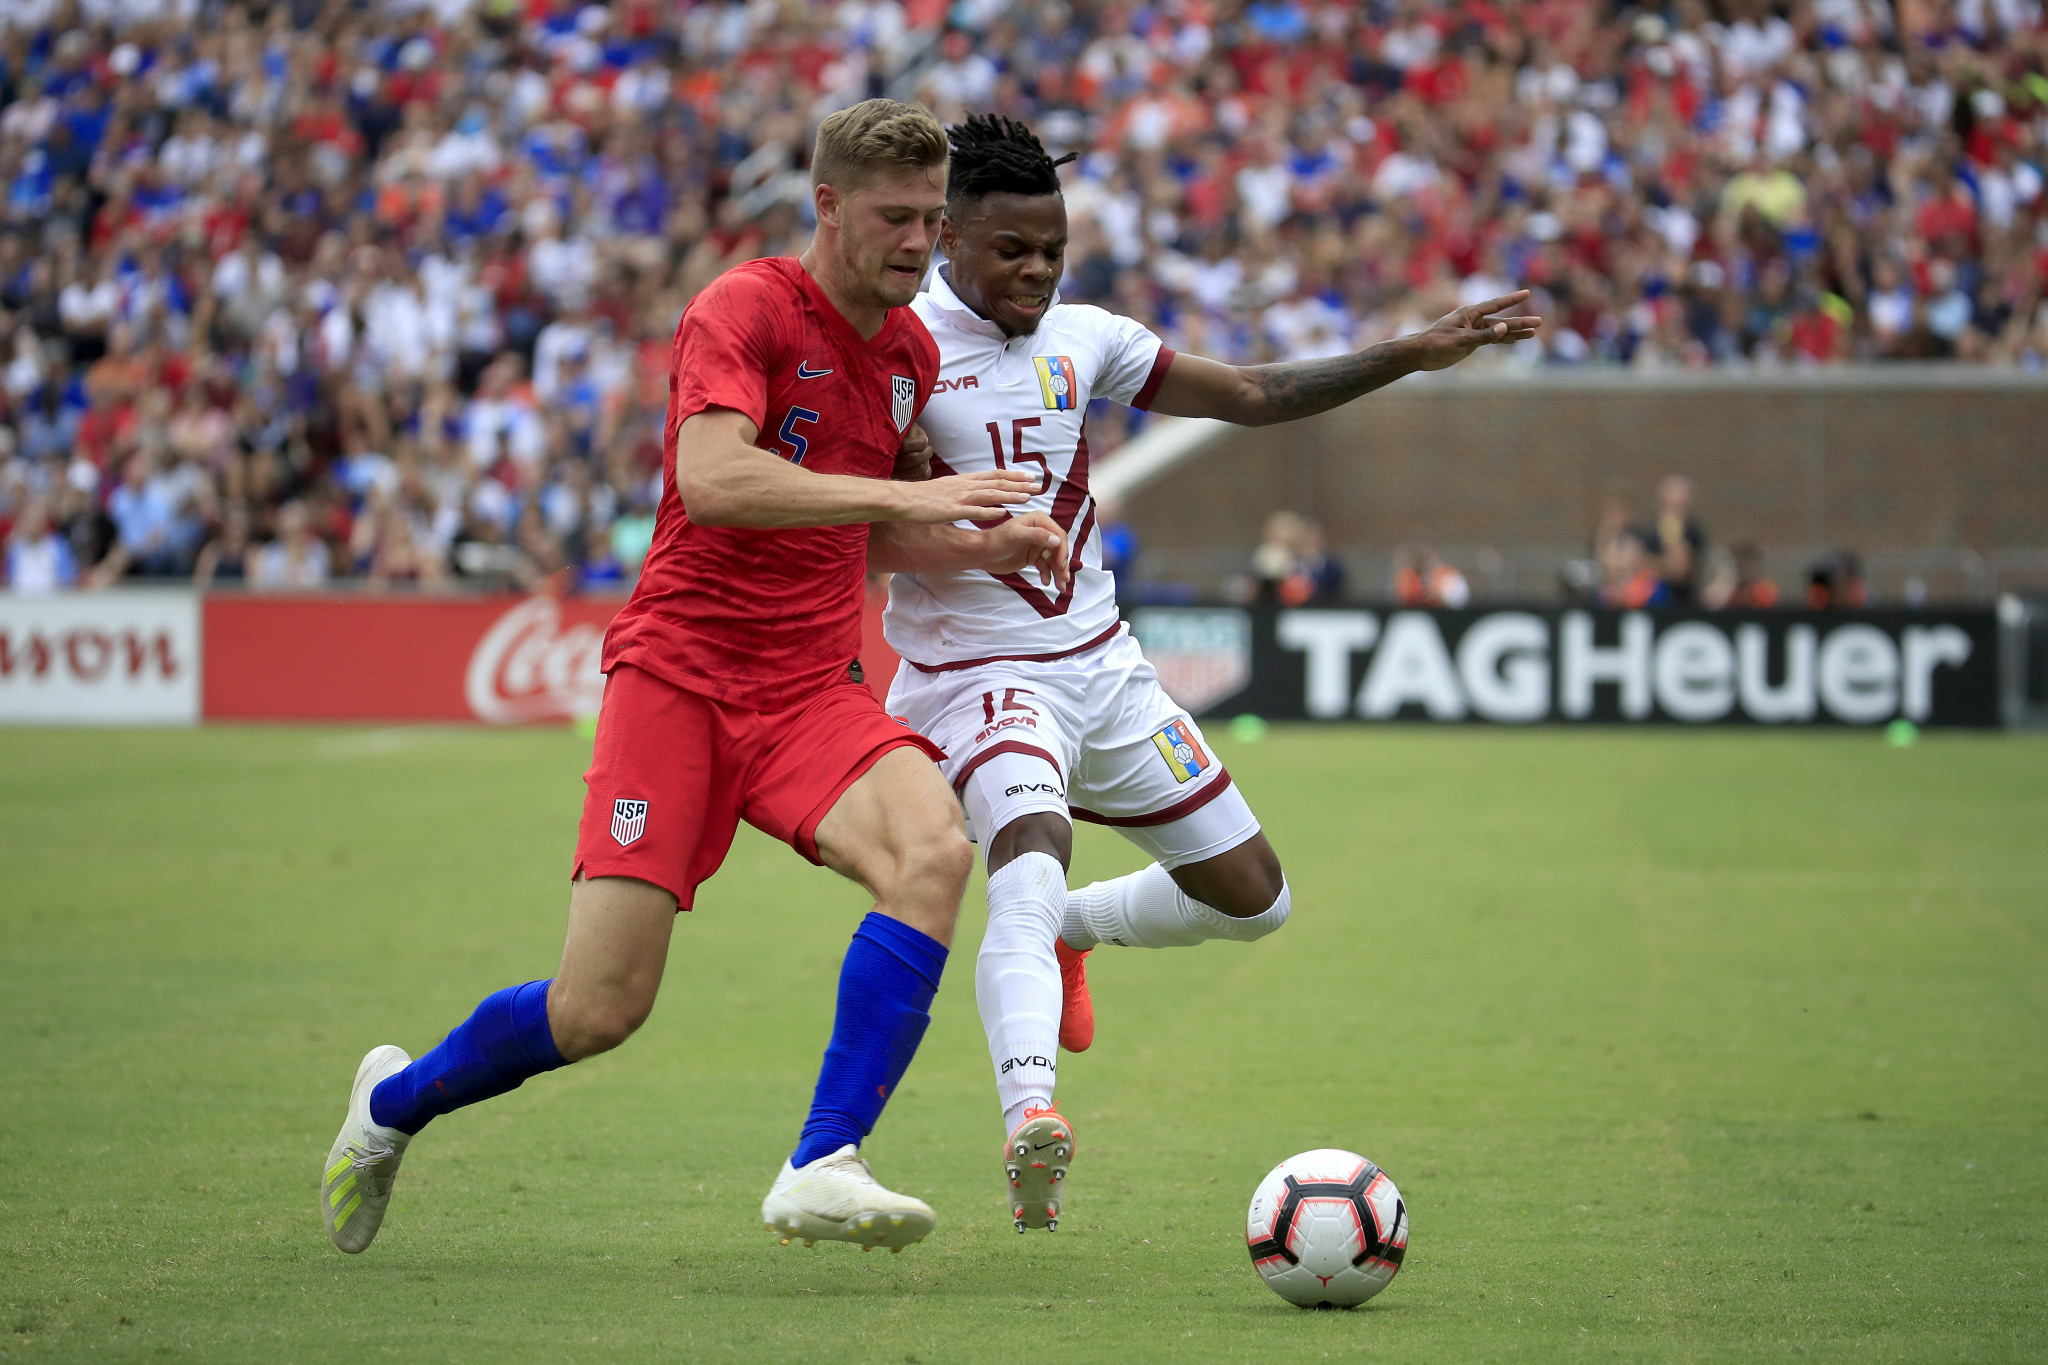 United States seeking upturn in form ahead of Gold Cup defence